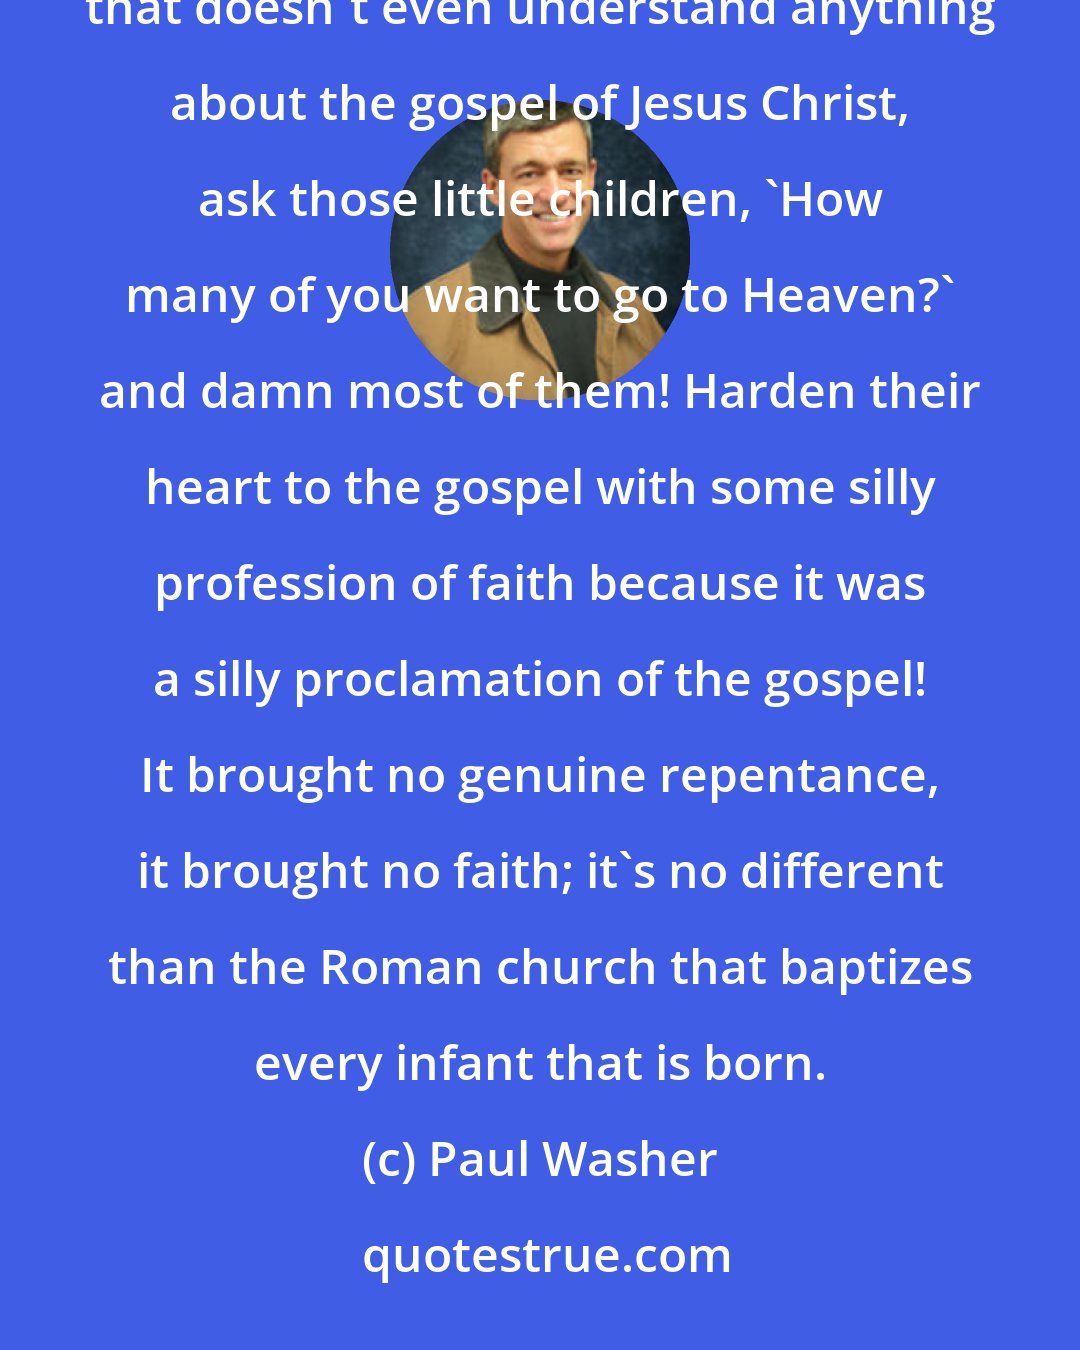 Paul Washer: I would not send my child to a vacation Bible school in 99.9% of the Baptist churches in America. Have some teacher that doesn't even understand anything about the gospel of Jesus Christ, ask those little children, 'How many of you want to go to Heaven?' and damn most of them! Harden their heart to the gospel with some silly profession of faith because it was a silly proclamation of the gospel! It brought no genuine repentance, it brought no faith; it's no different than the Roman church that baptizes every infant that is born.